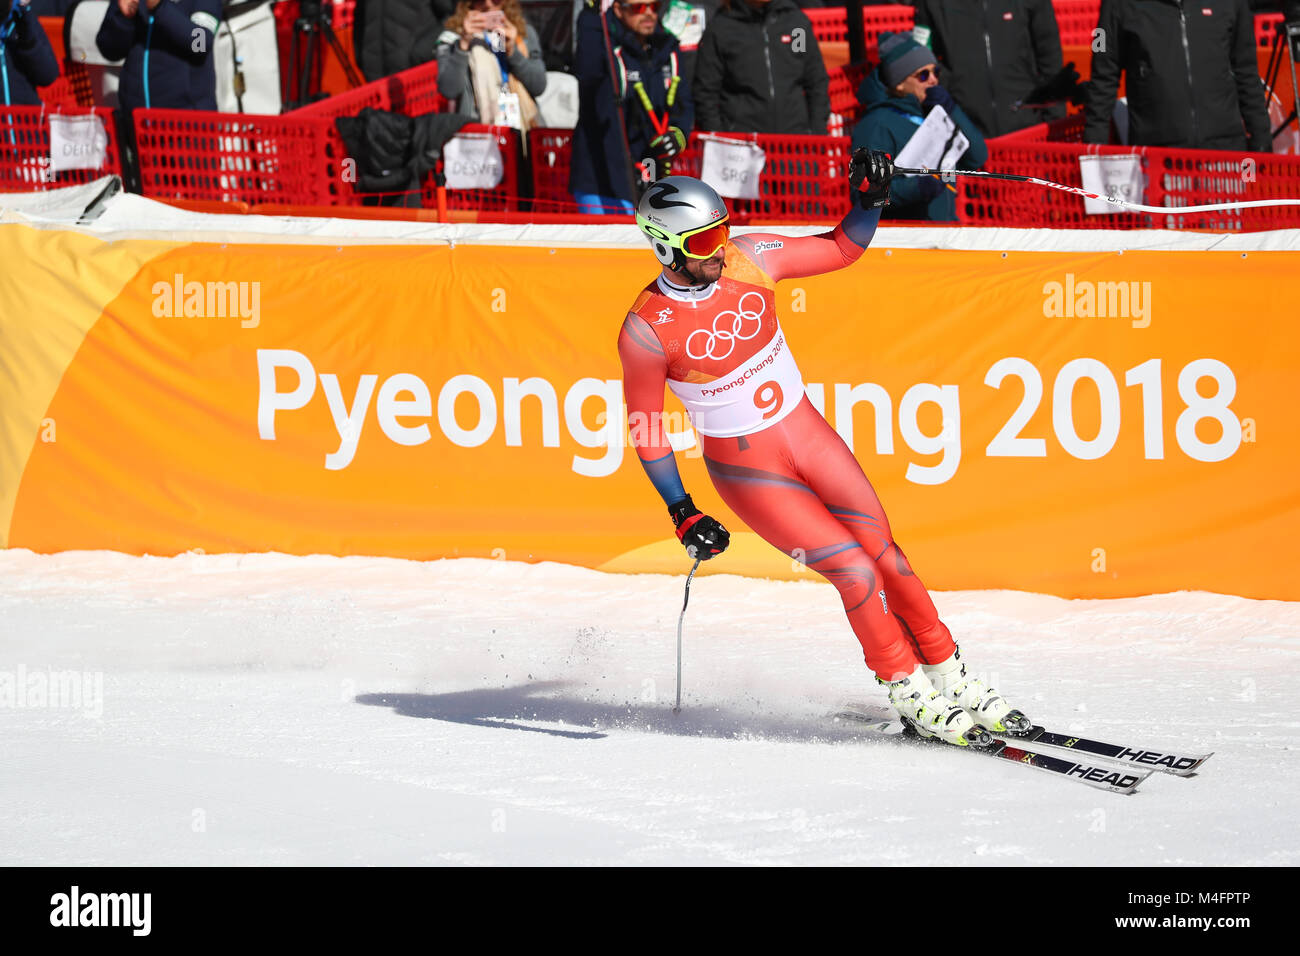 Pyeongchang, South Korea. 16th Feb, 2018. Jeongseon, South Korea. 16th Feb, 2018. Aksel Lund Svindal of Norway in the men's Super G alpine skiing event during the Pyeongchang 2018 winter olympics in Jeongseon, South Korea. Credit: Daniel Karmann/dpa/Alamy Live News Stock Photo